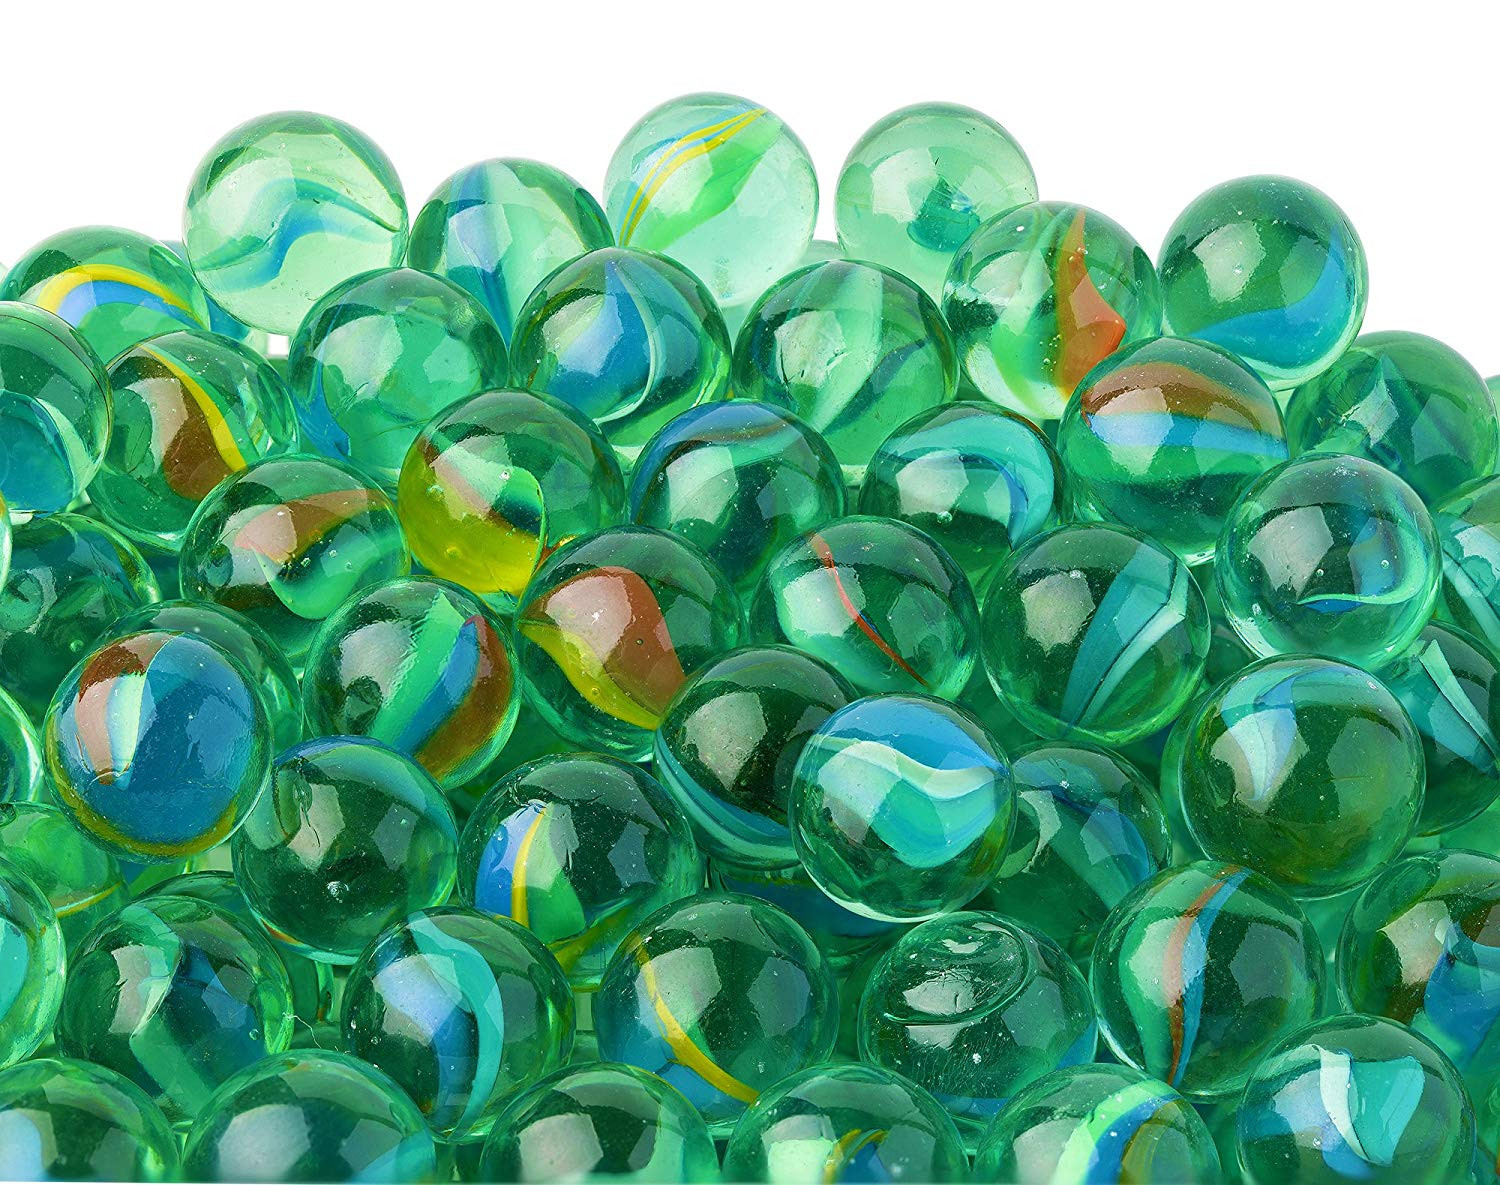 19 Trendy Glass Vase Fillers Bulk 2024 free download glass vase fillers bulk of decorative glass marbles bulk www topsimages com regarding marbles approx marbles for marble run clear glass jpg 1500x1185 decorative glass marbles bulk